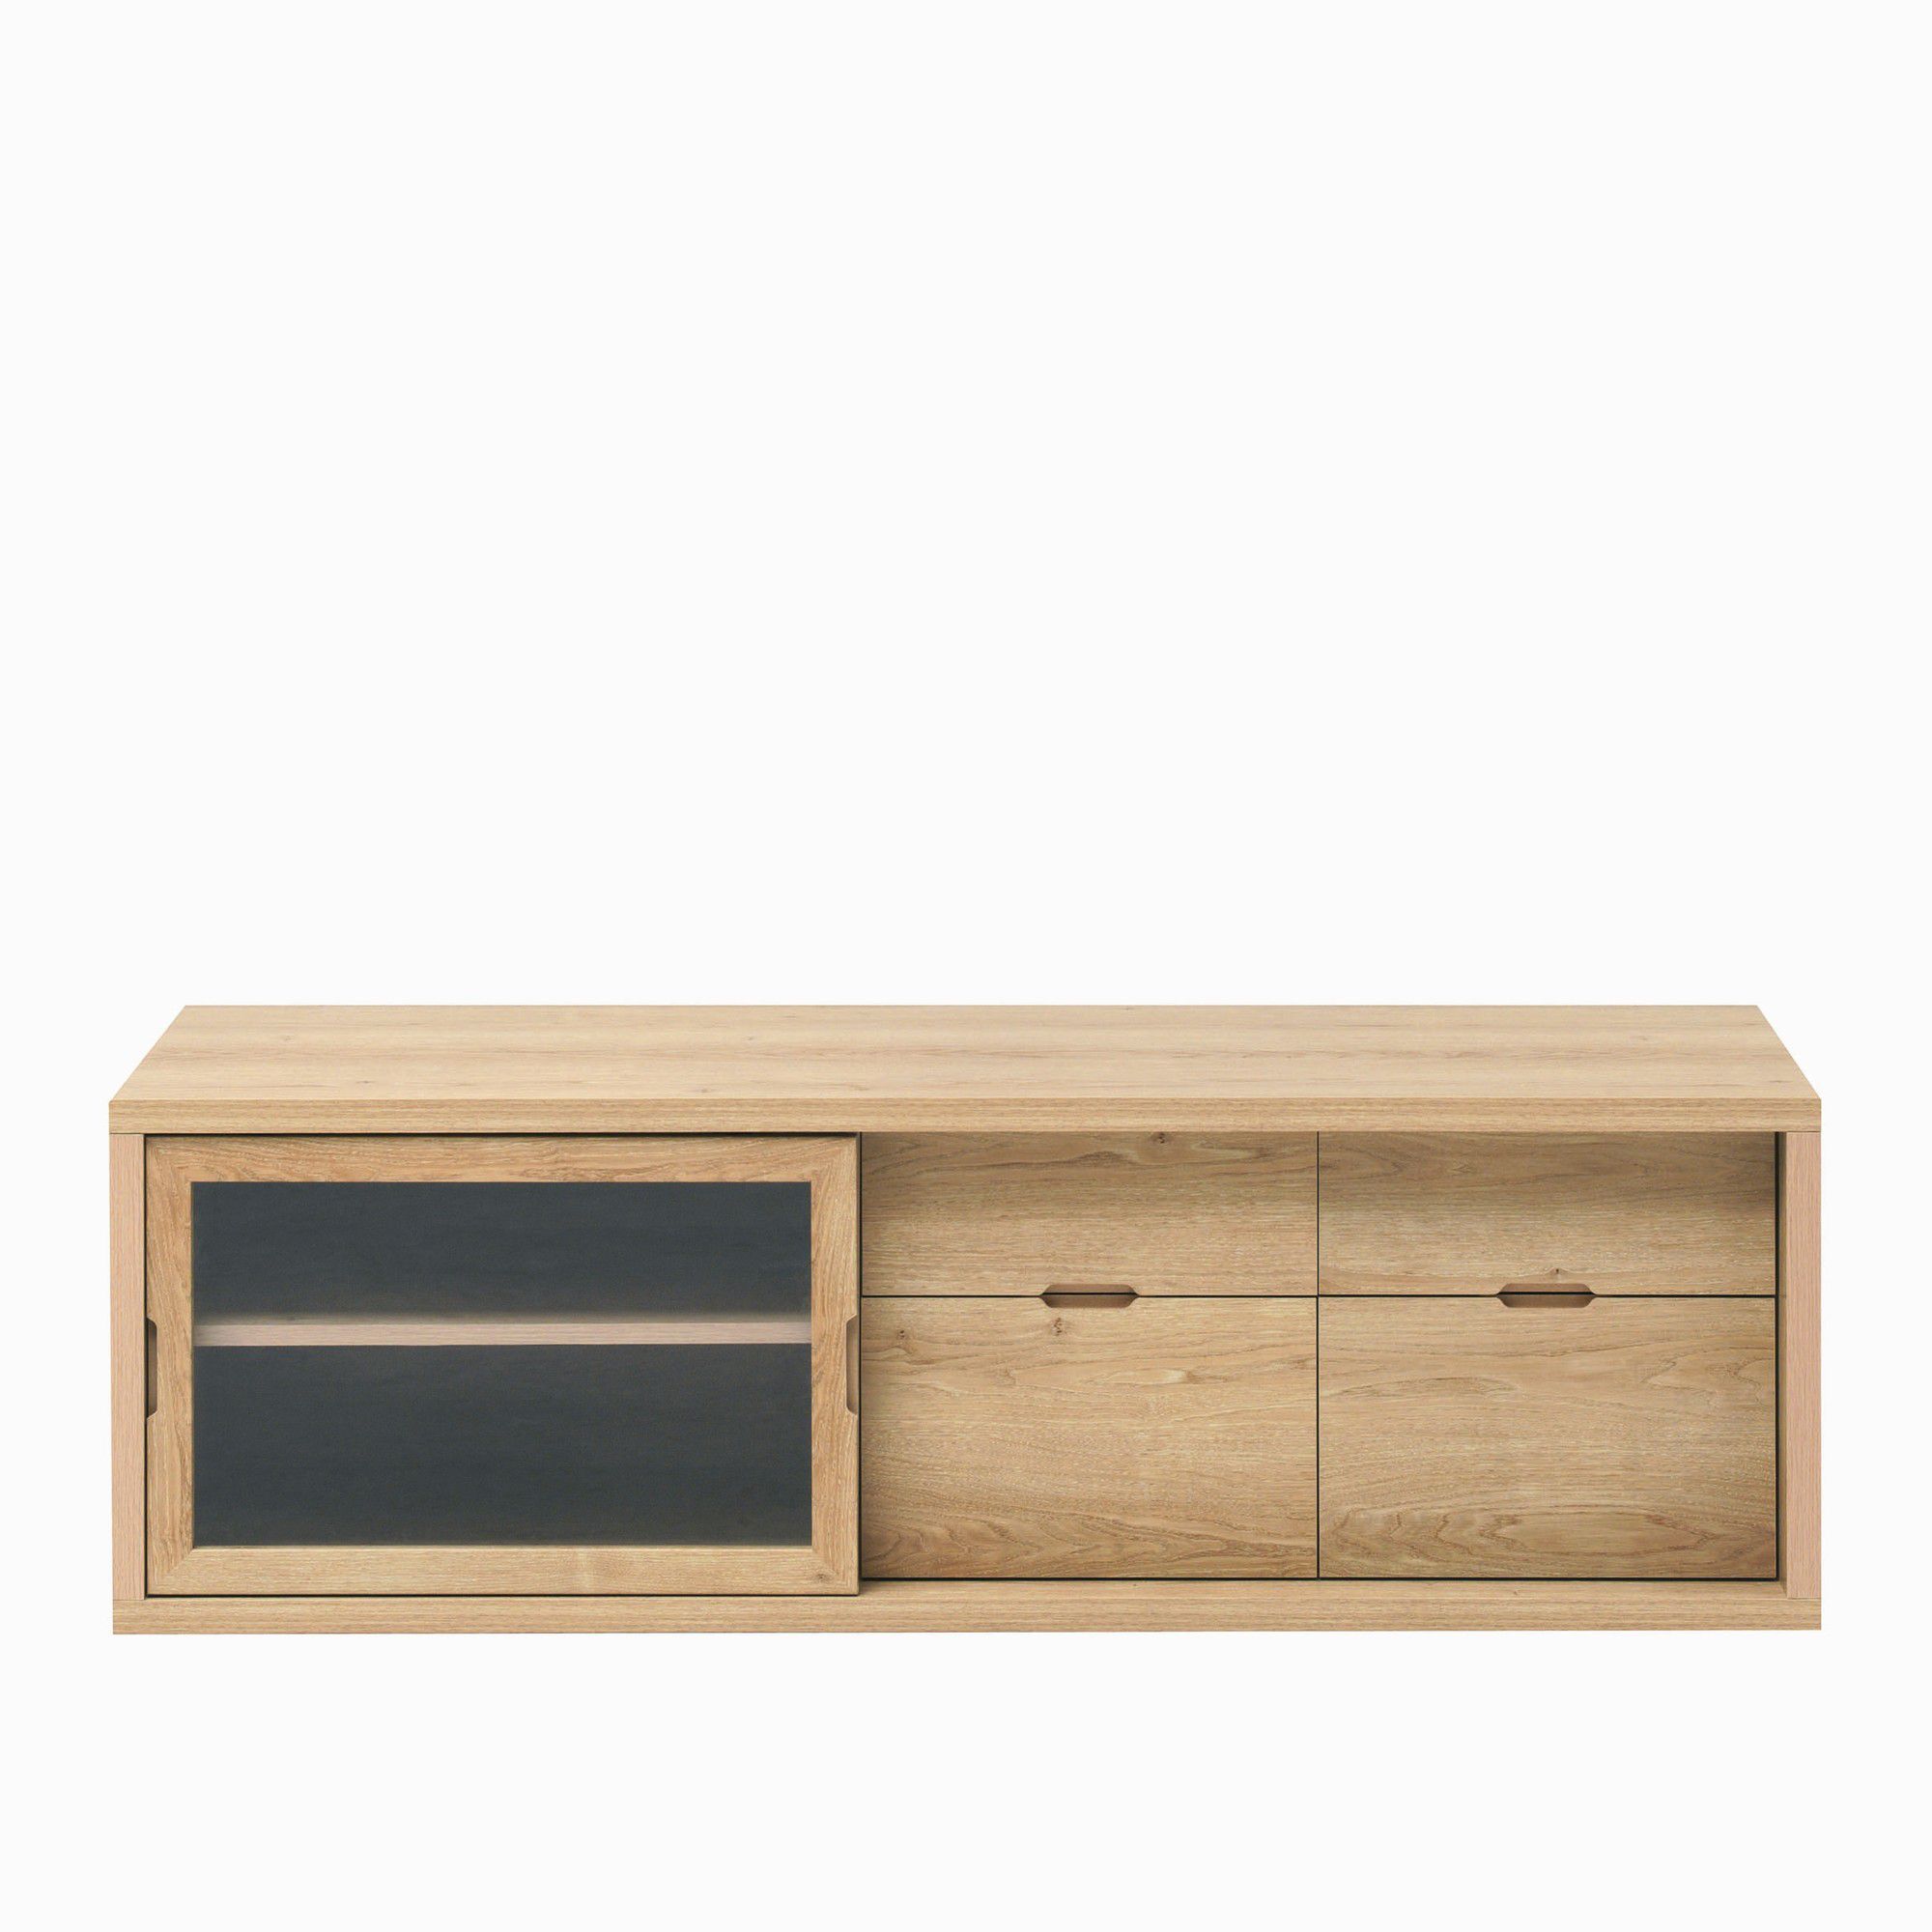 Caxton Darwin Wide Entertainment Cabinet in Chestnut at Tesco Direct